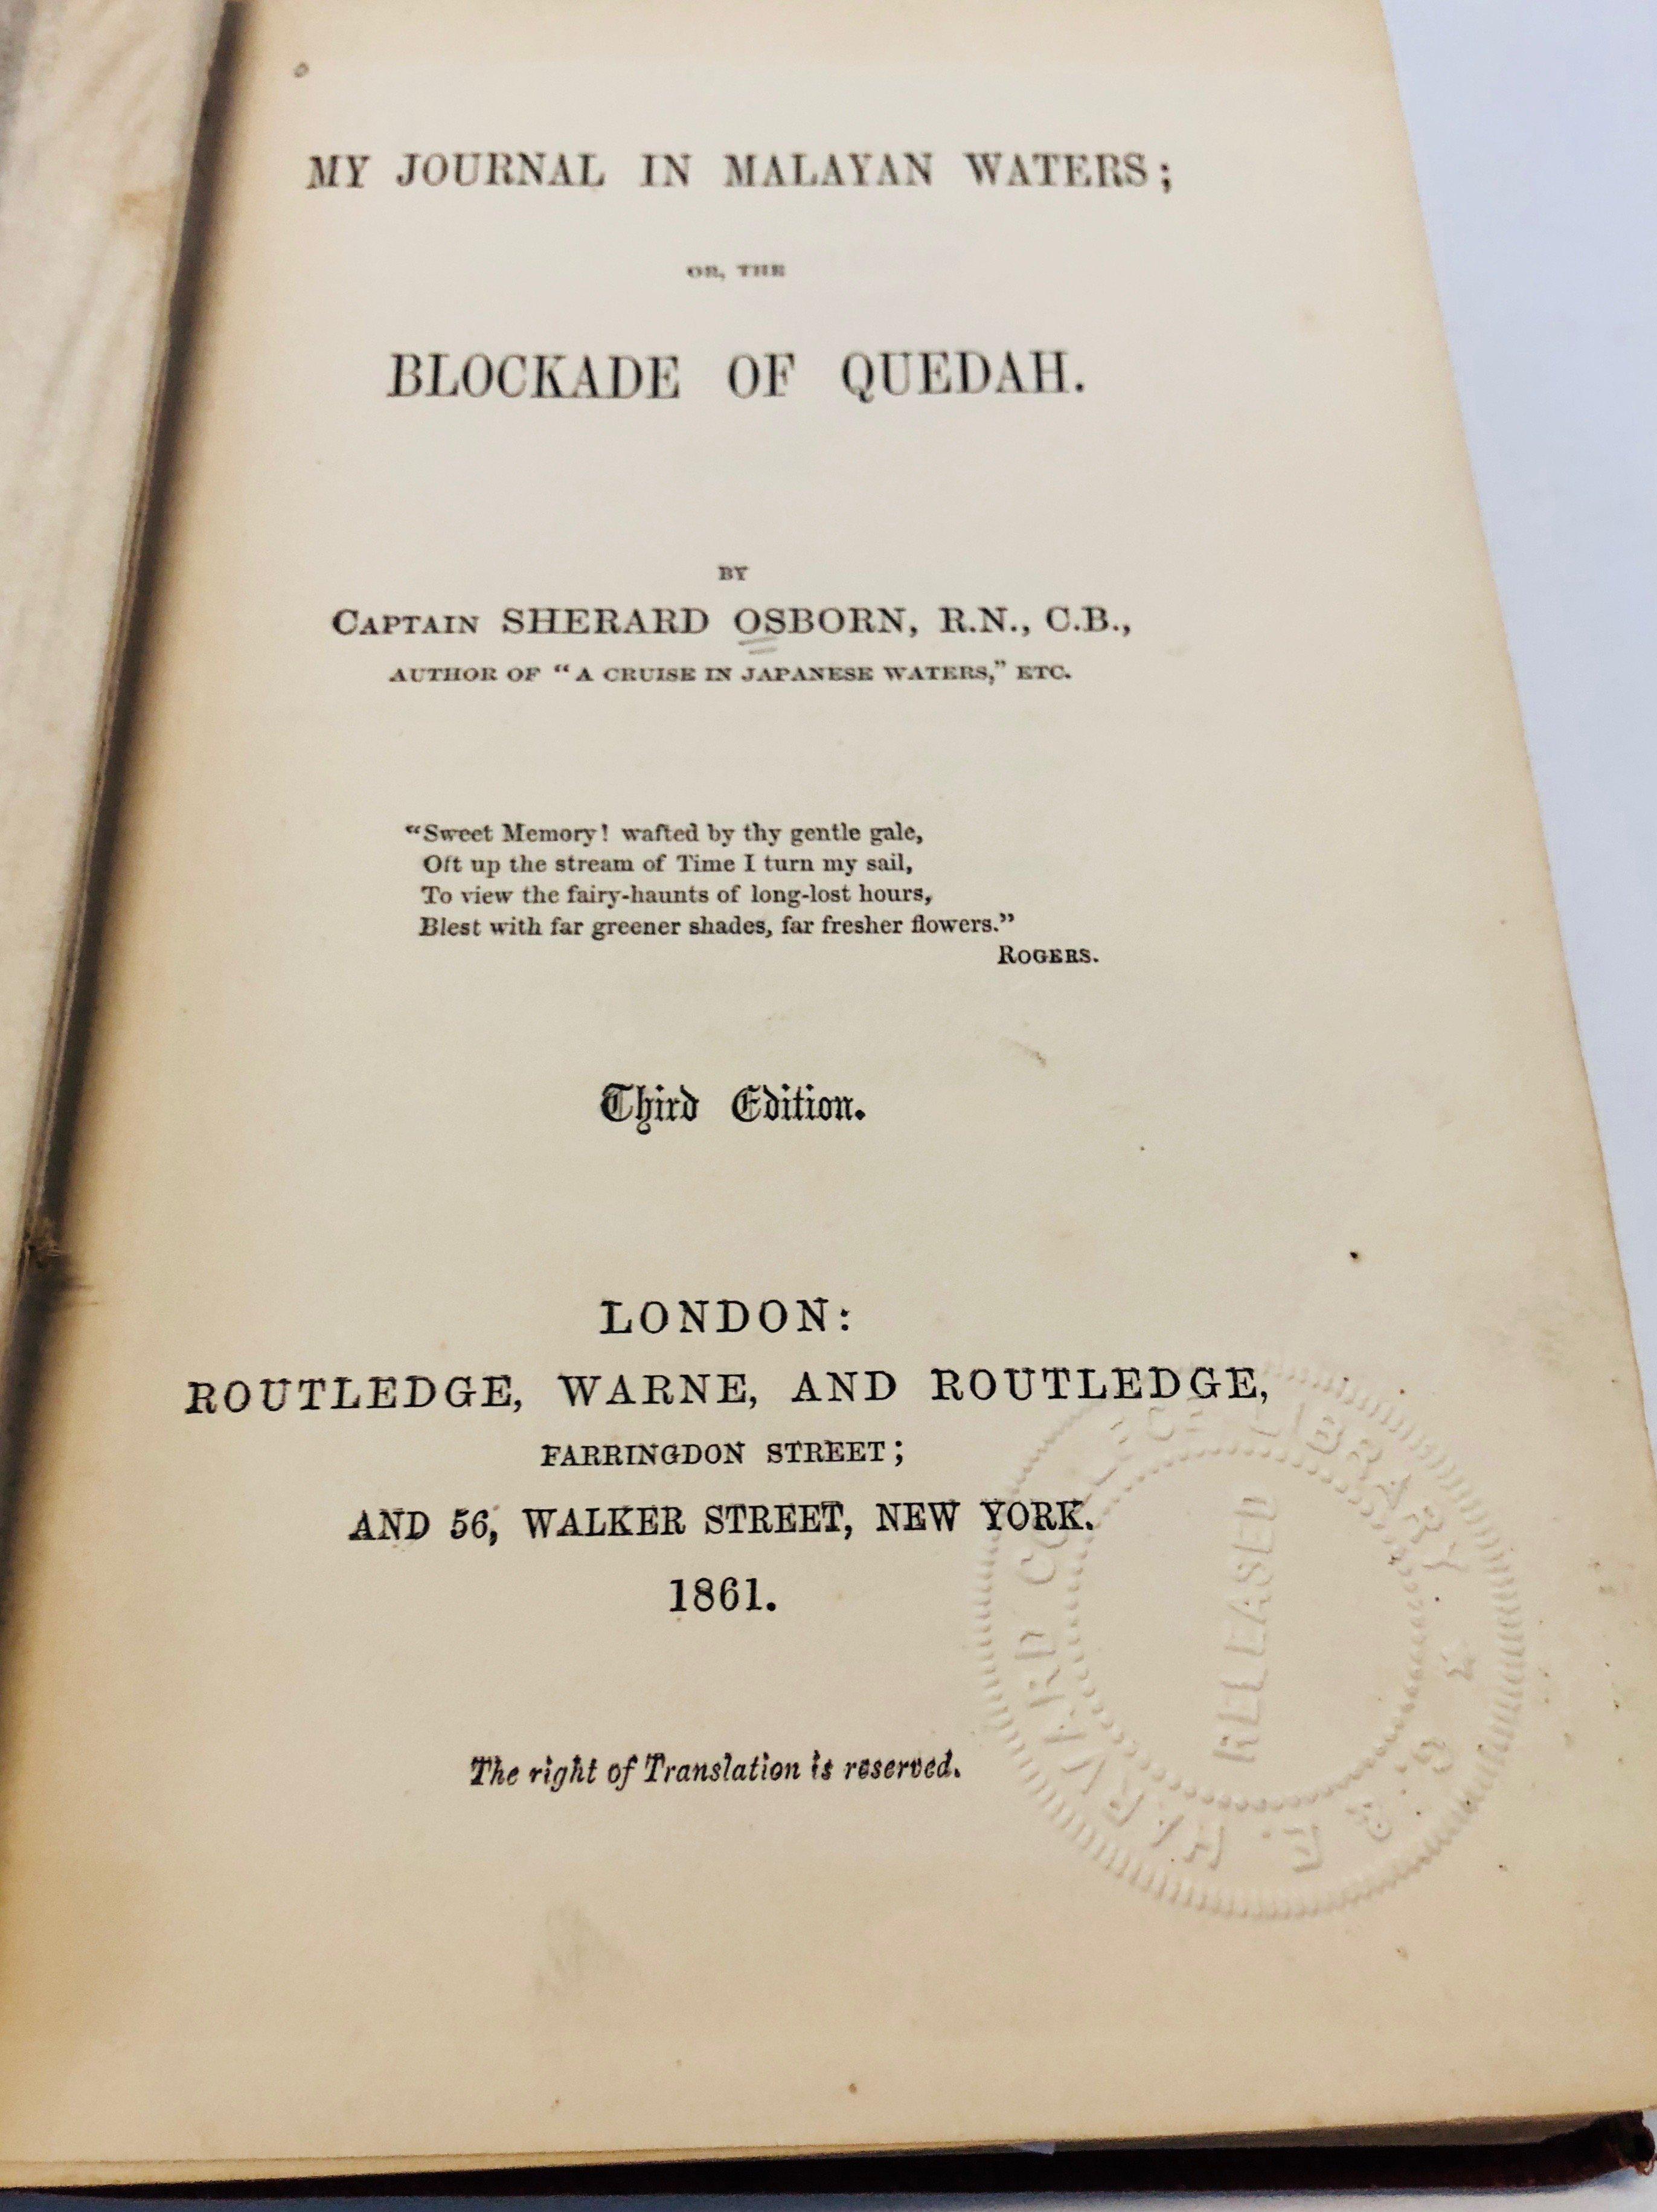 RARE My Journal in Malayan Waters or, the Blockade of Quedah (1861)